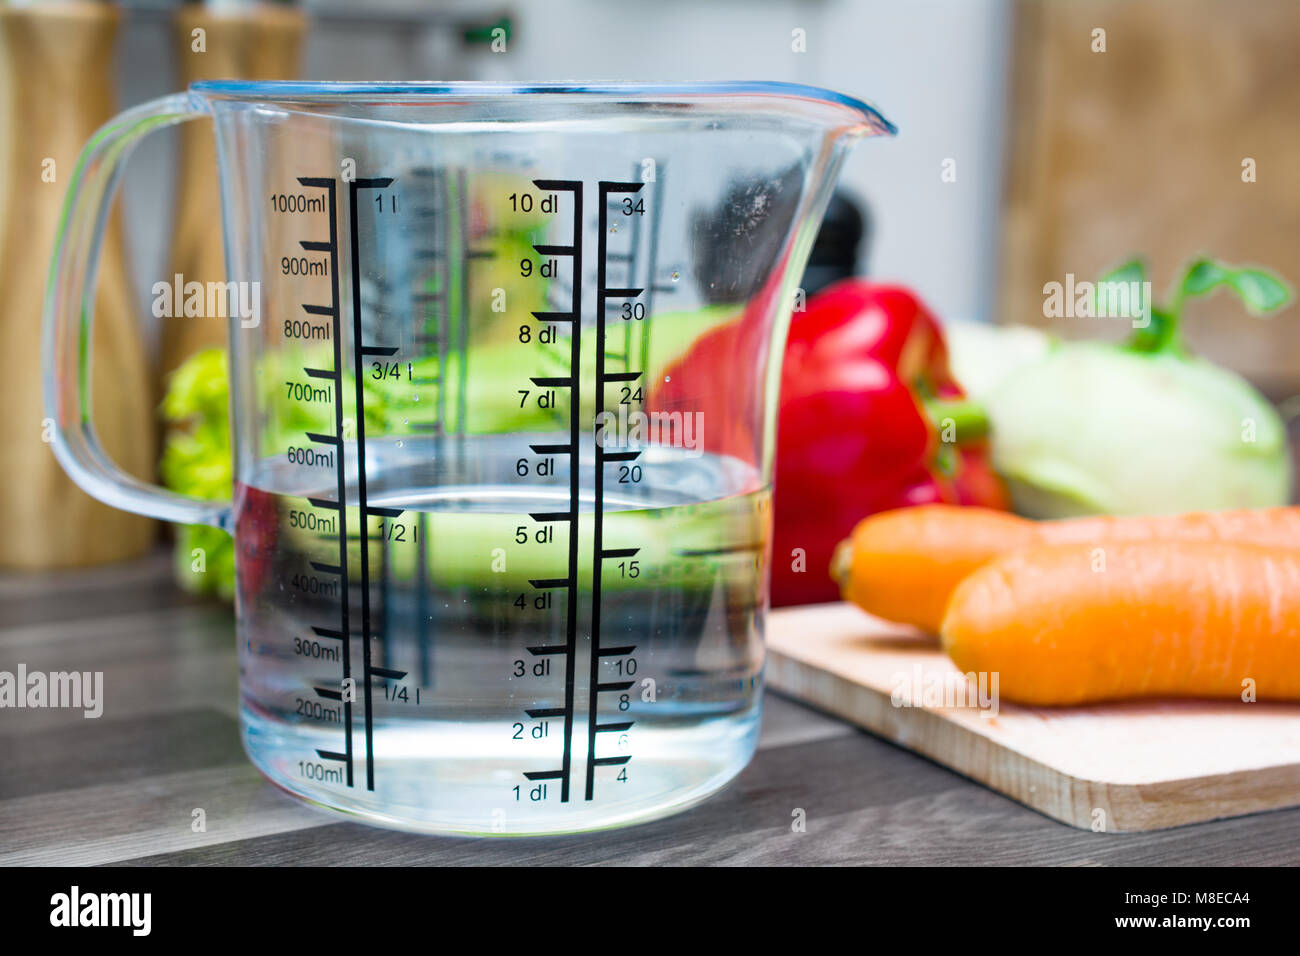 1/2 Liter / 500ml / 5dl Of Water In A Measuring Cup On A Kitchen Counter  With Vegetables Stock Photo - Alamy